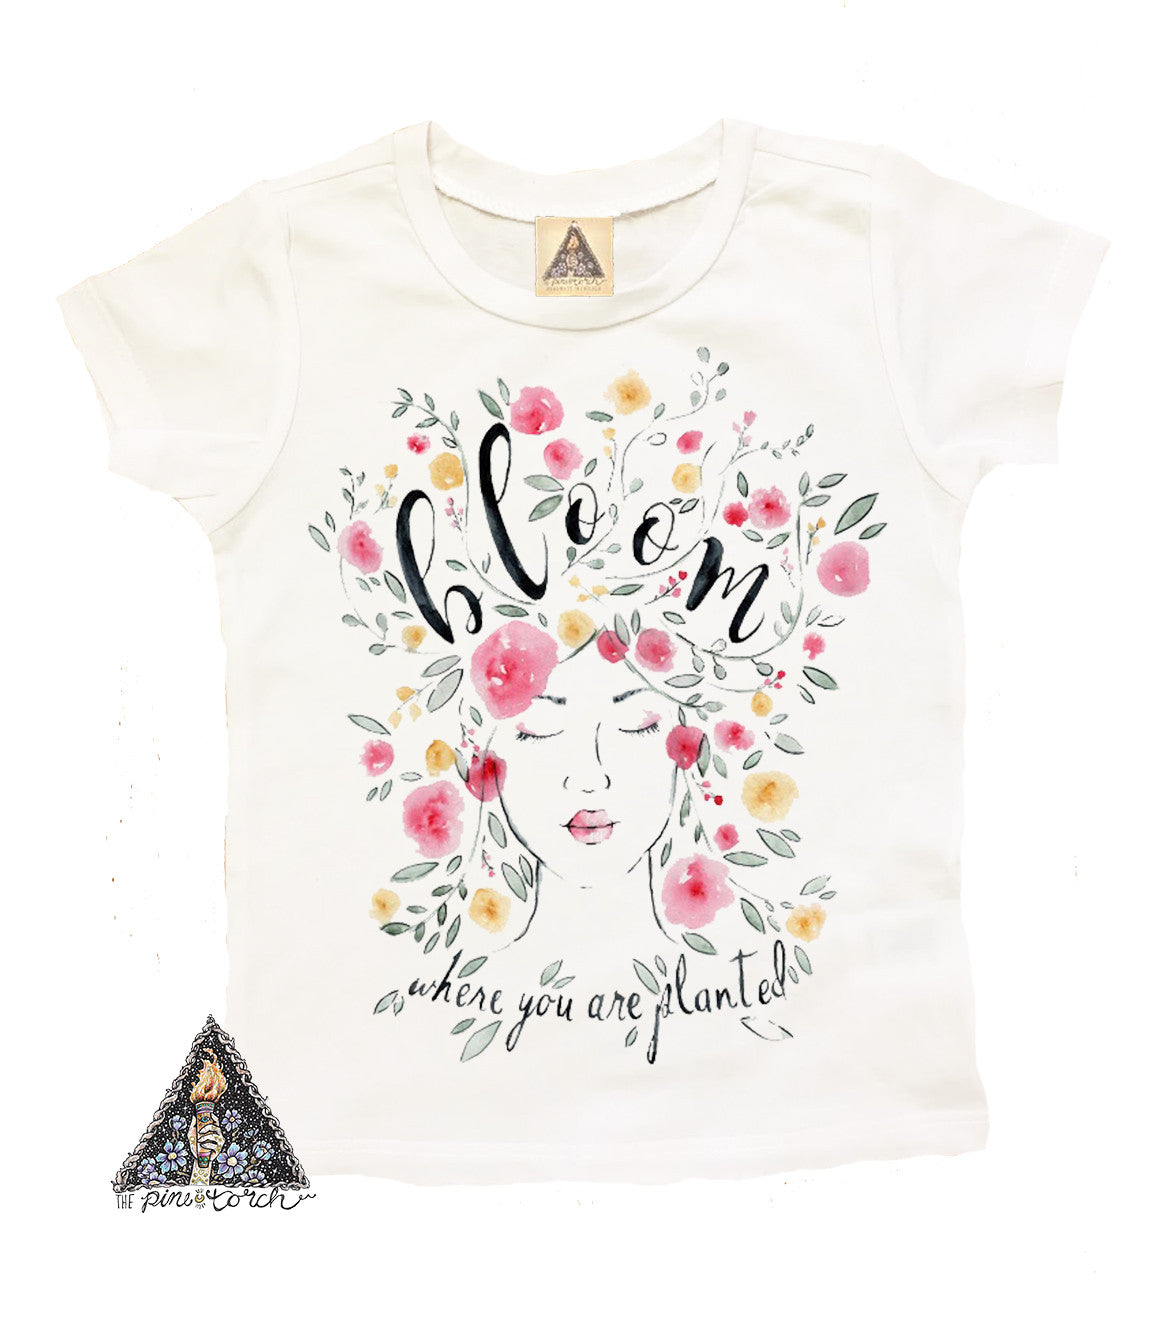 « BLOOM WHERE YOU ARE PLANTED » KID'S TEE